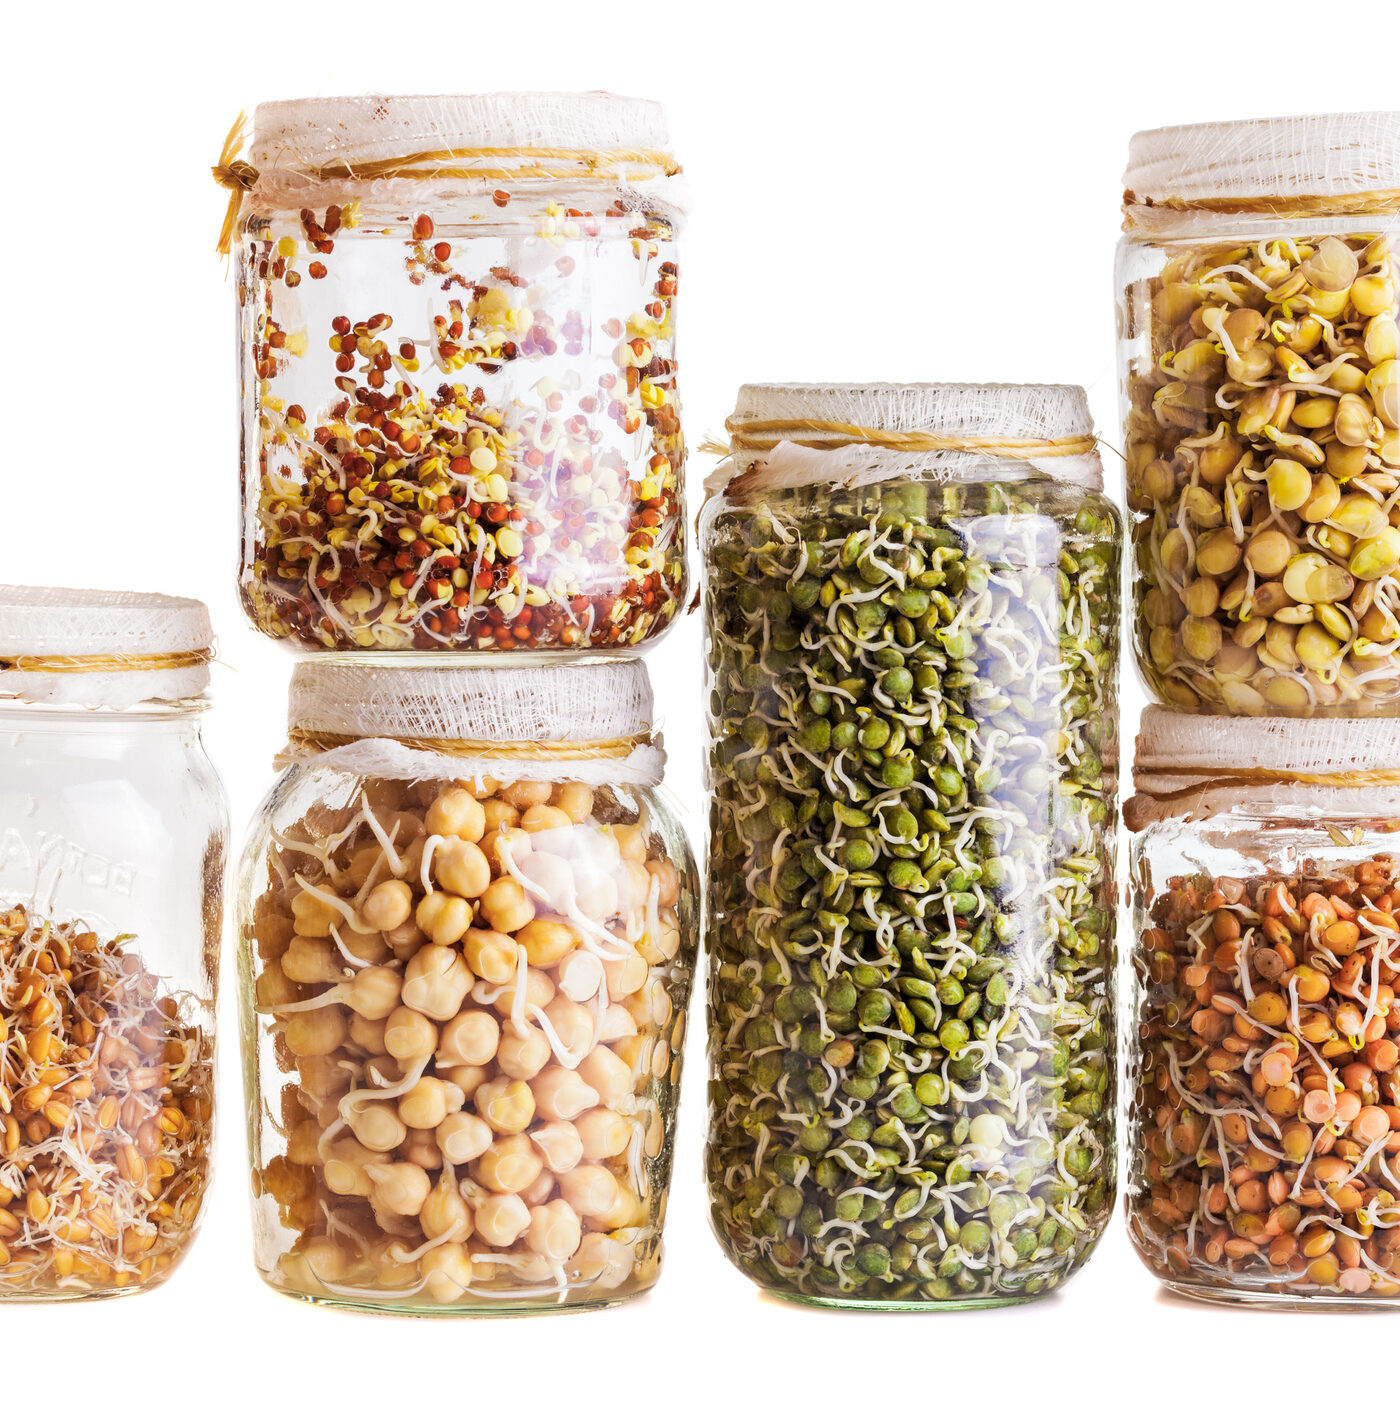 Sprouting Grains and Legumes